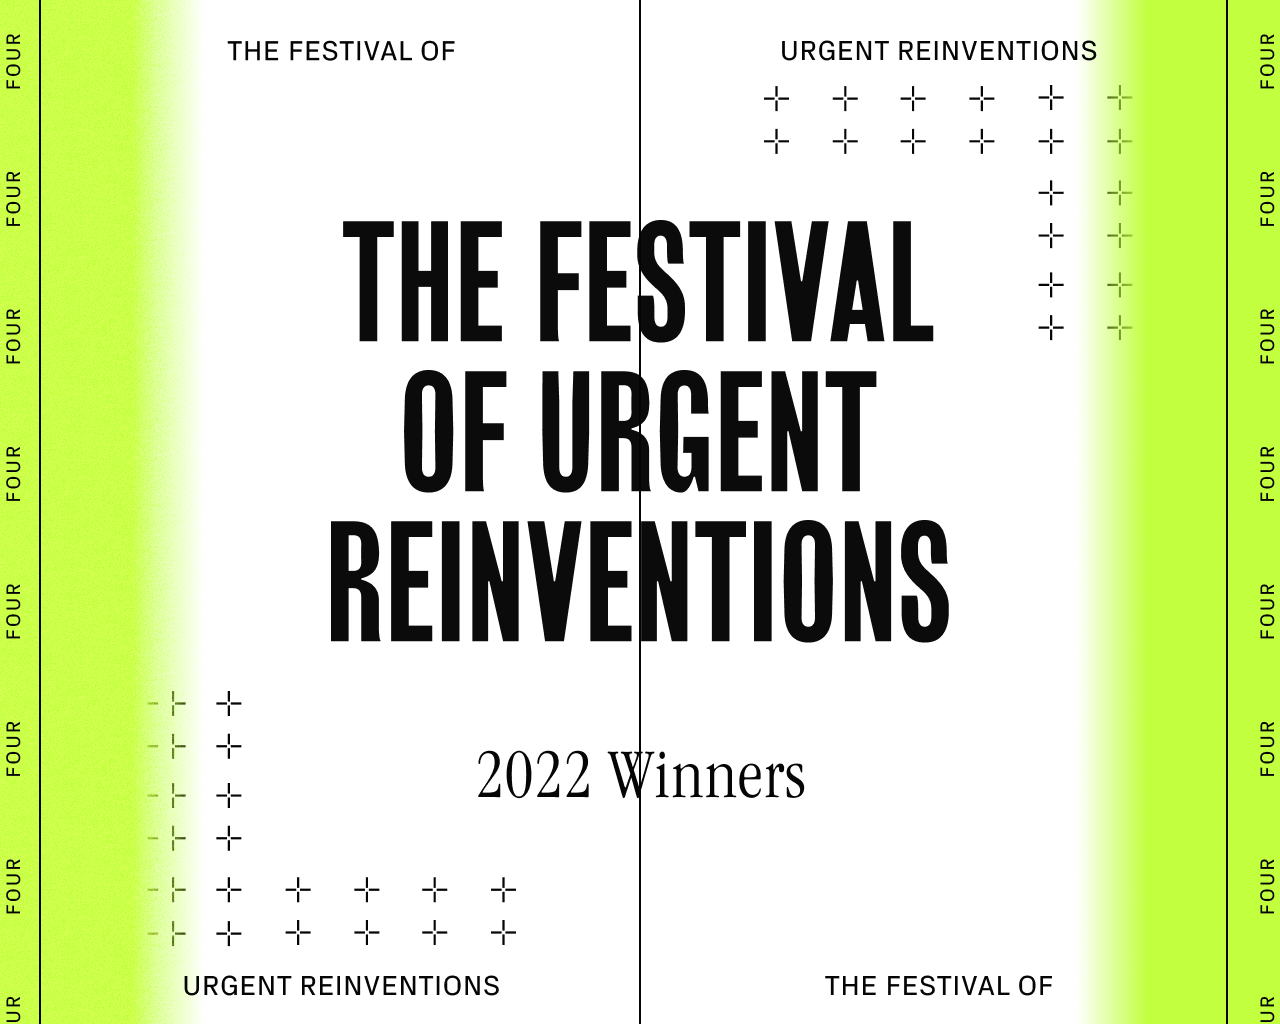 Here Are The Winning Ideas From the Festival Of Urgent Reinvention